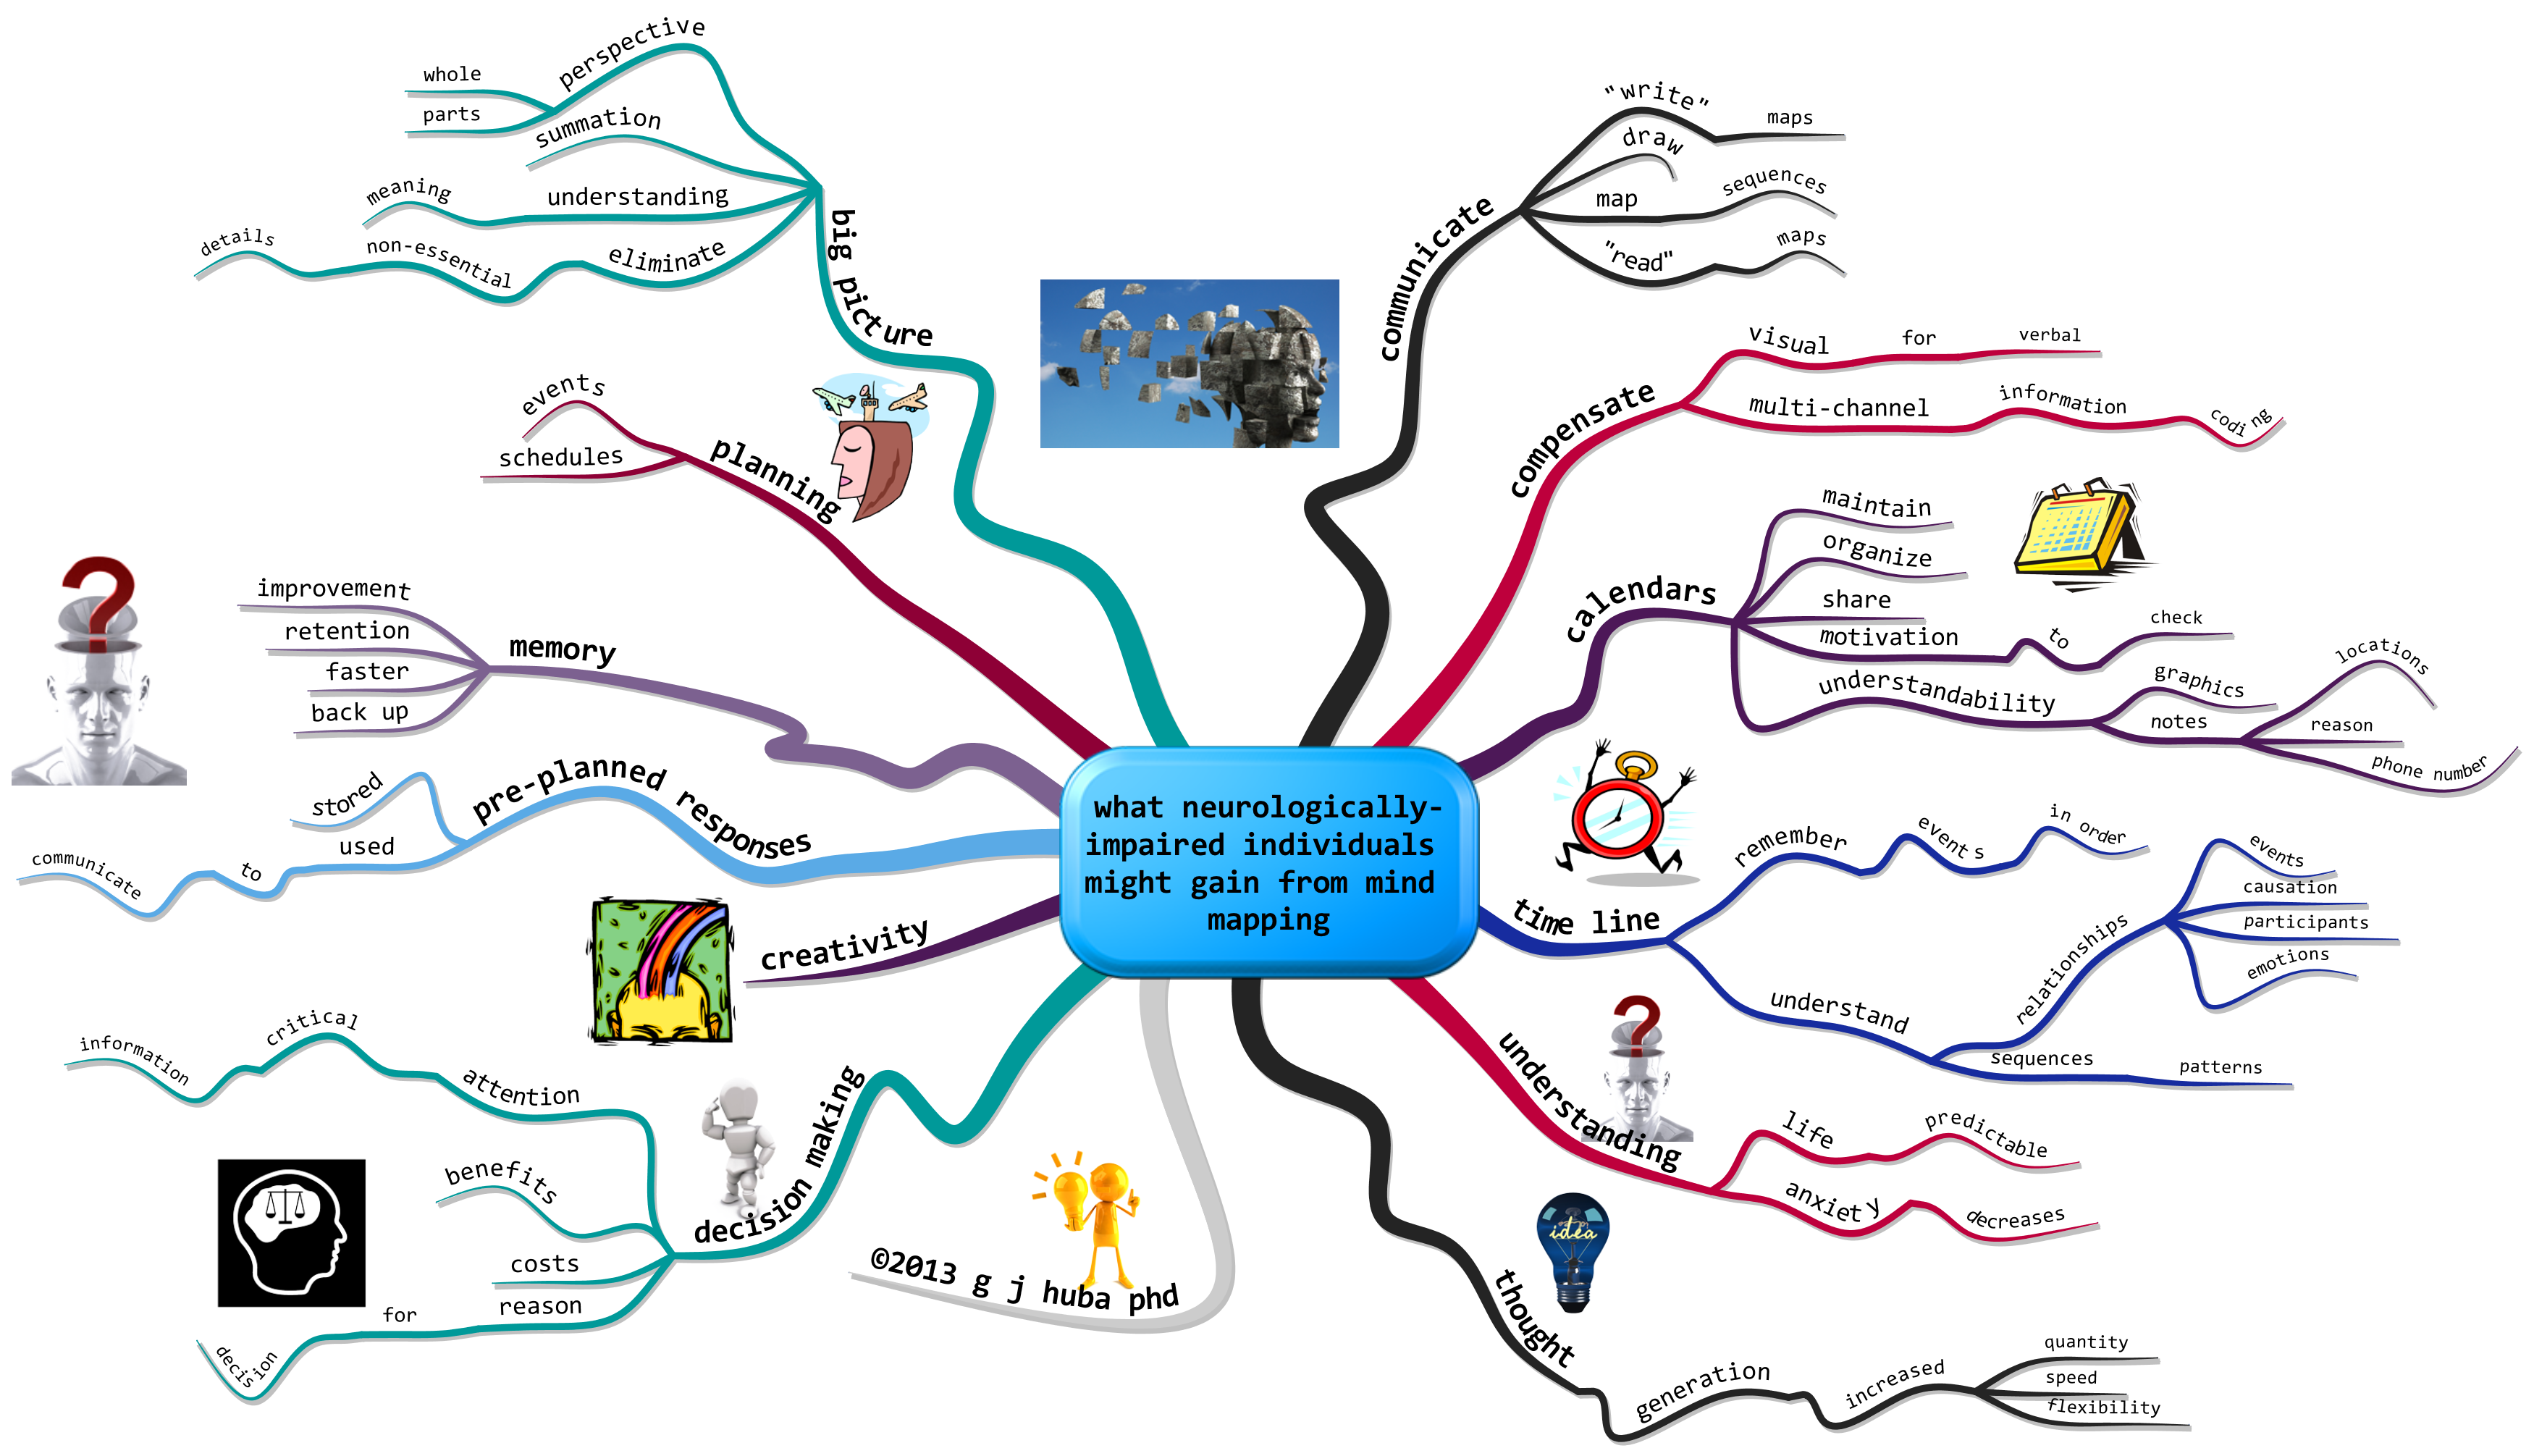 what neurologically-impaired individuals might gain from mind mapping